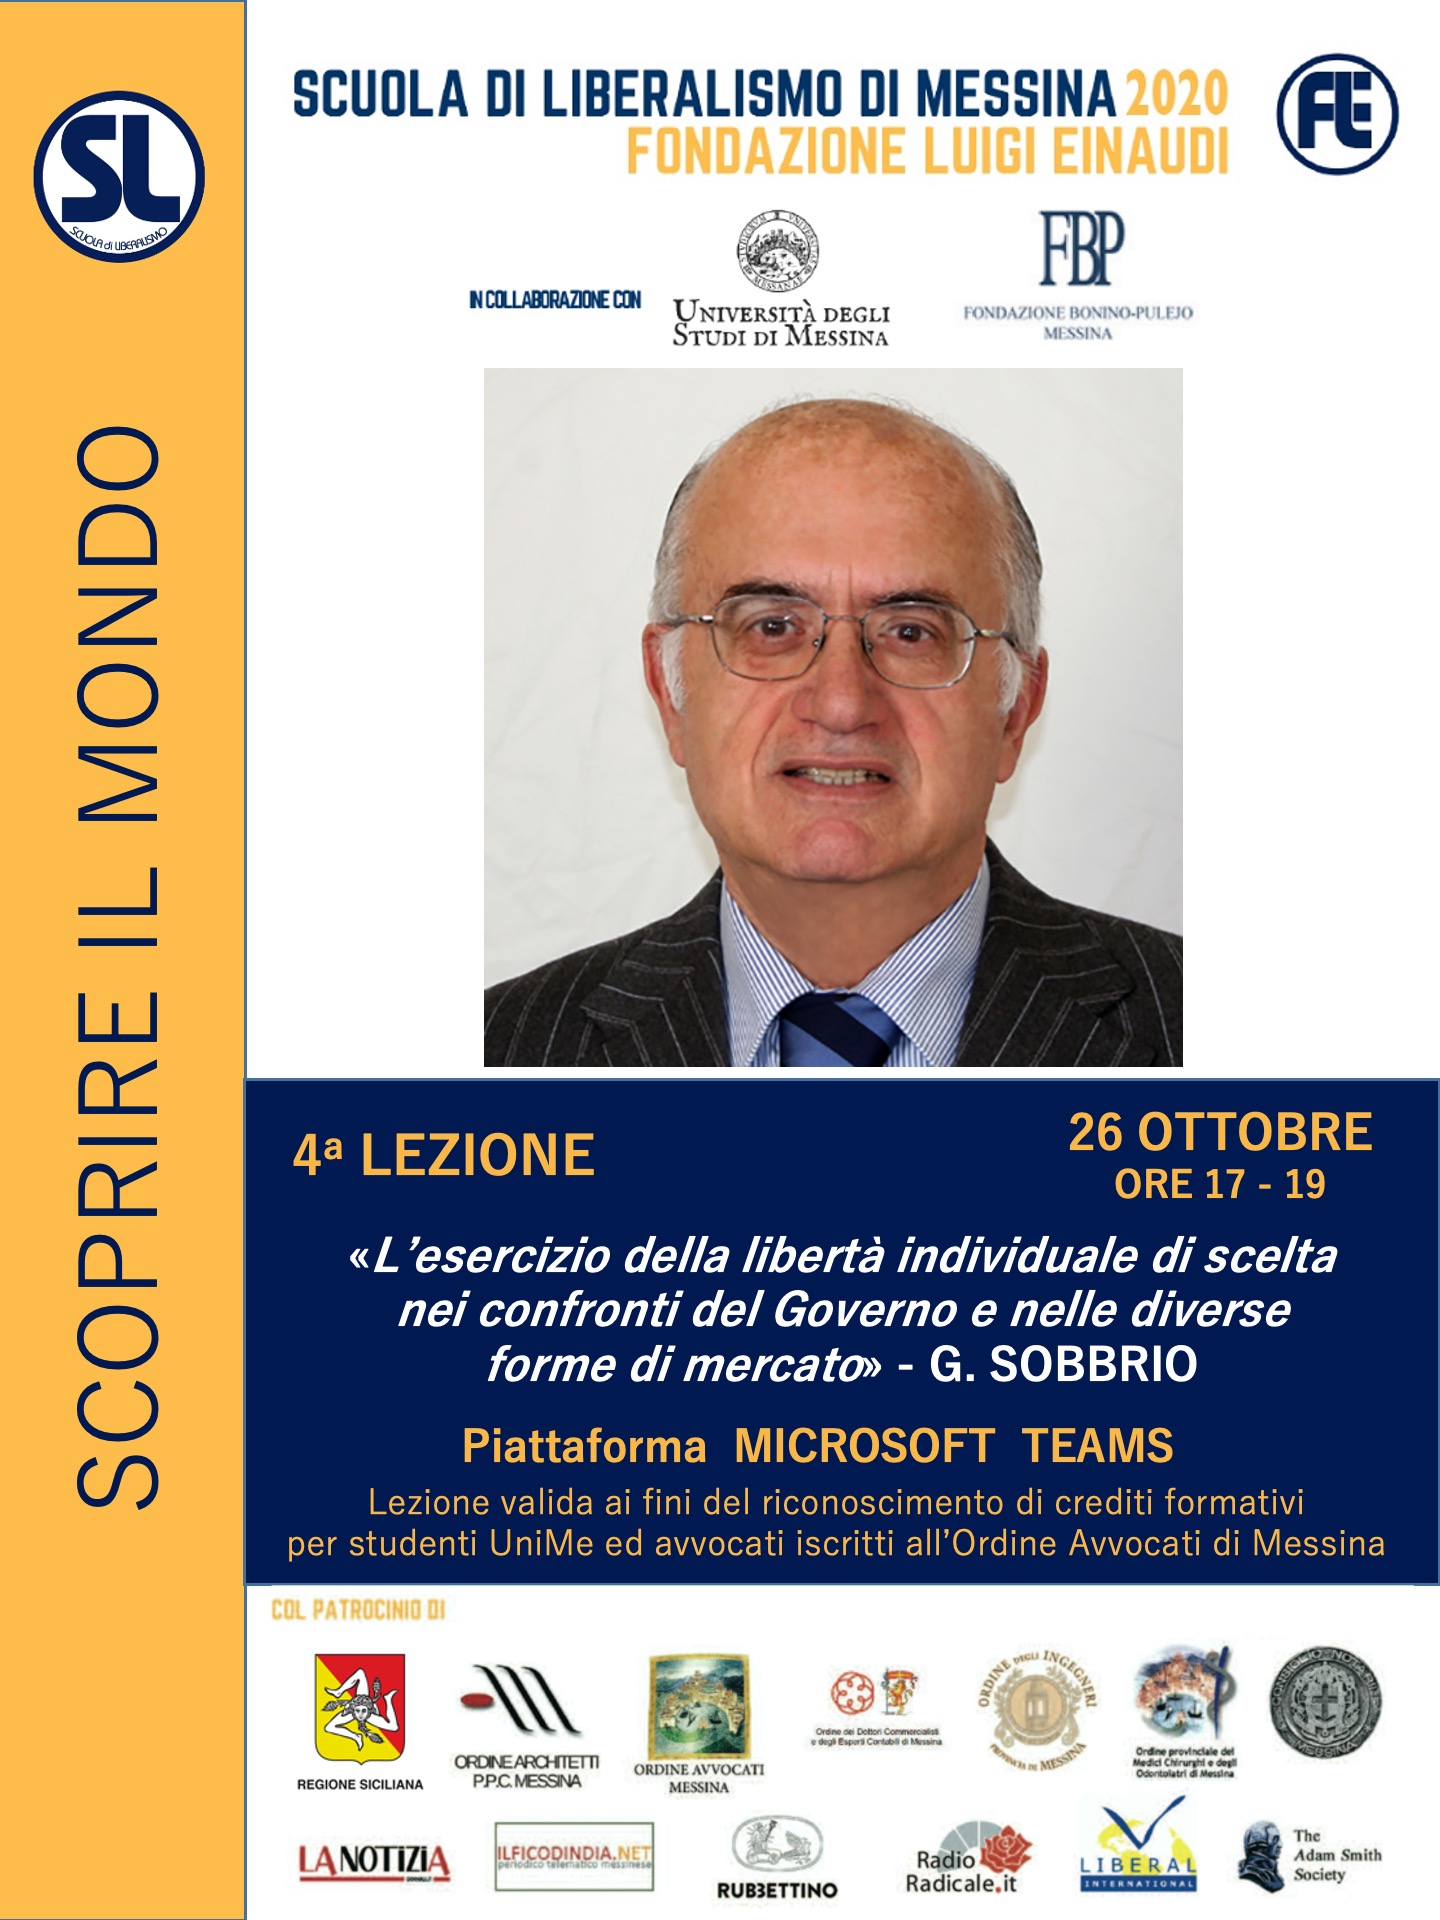 Messina, October 26, 2020. School of Liberalism: Giuseppe Sobbrio gives the lecture